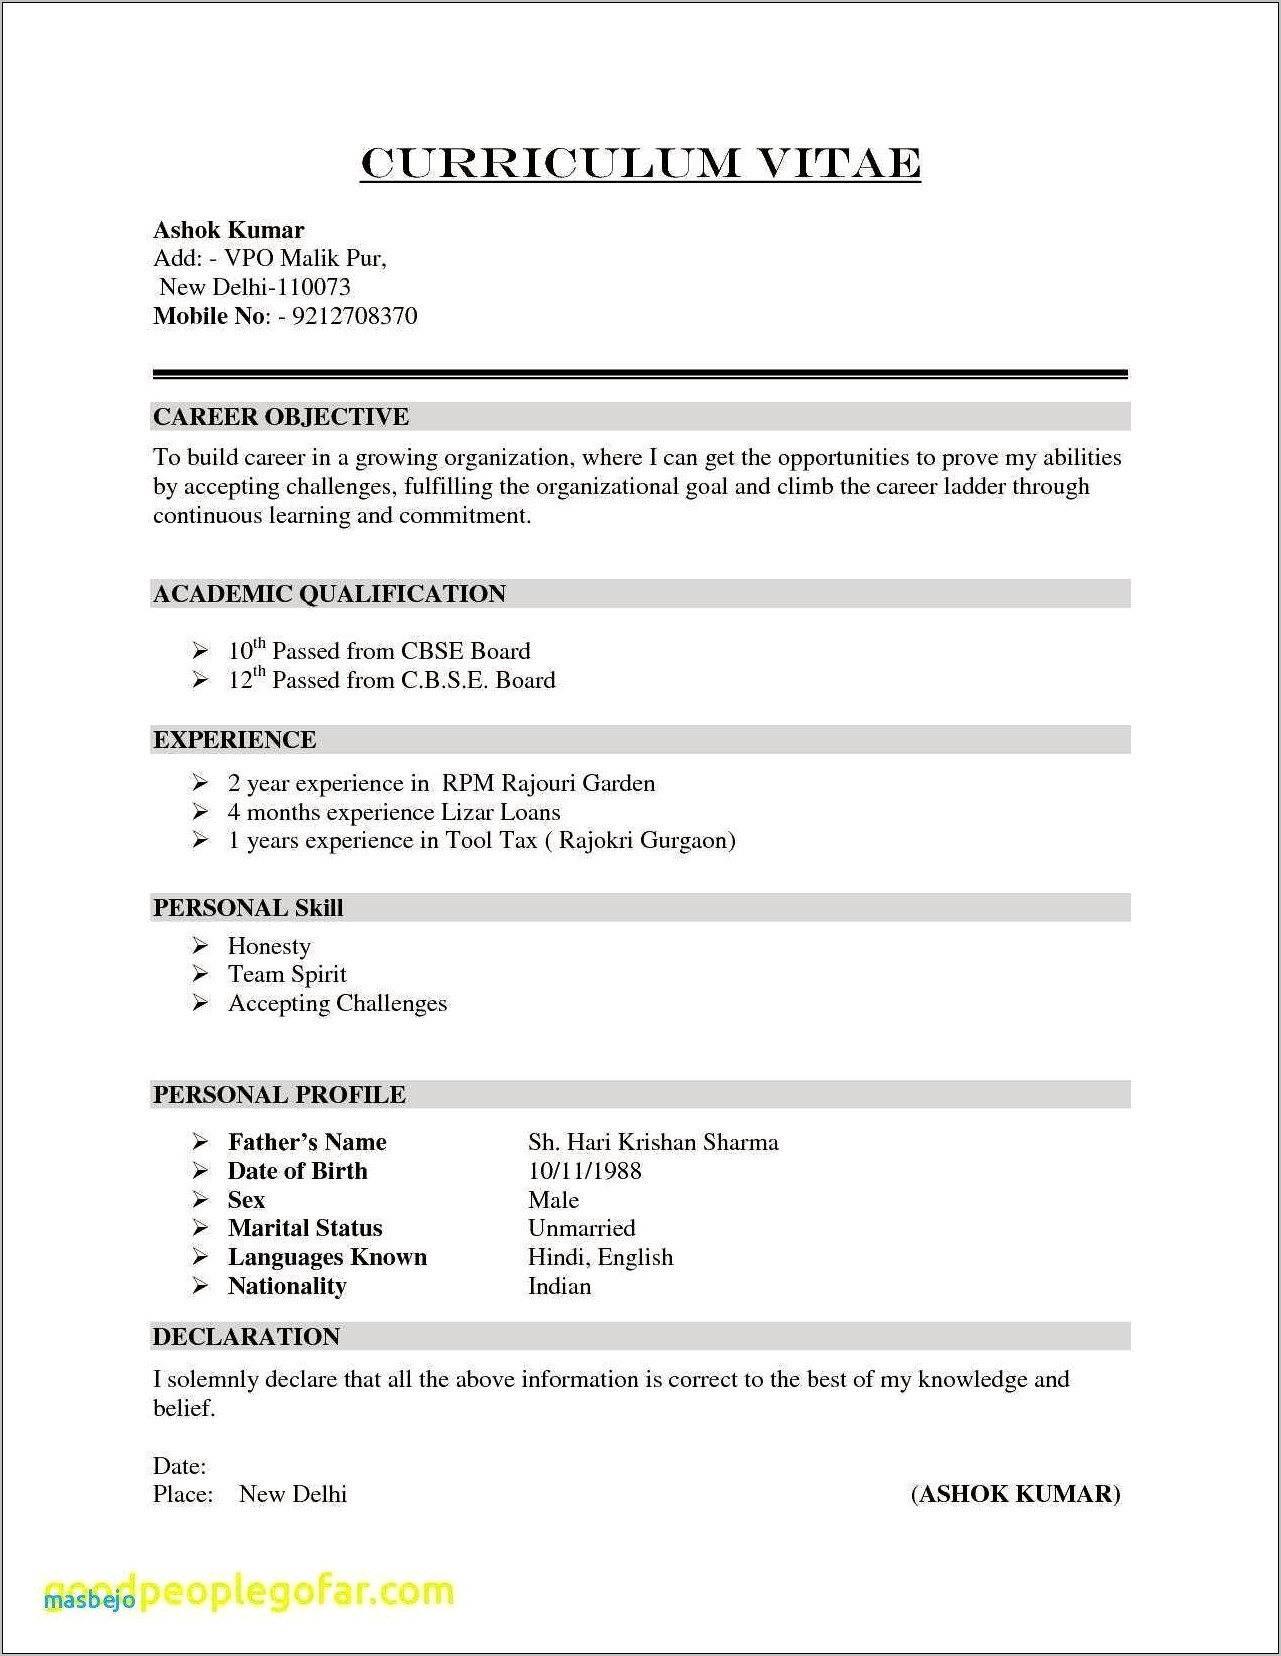 Sample Headlines For Resumes To Obtain